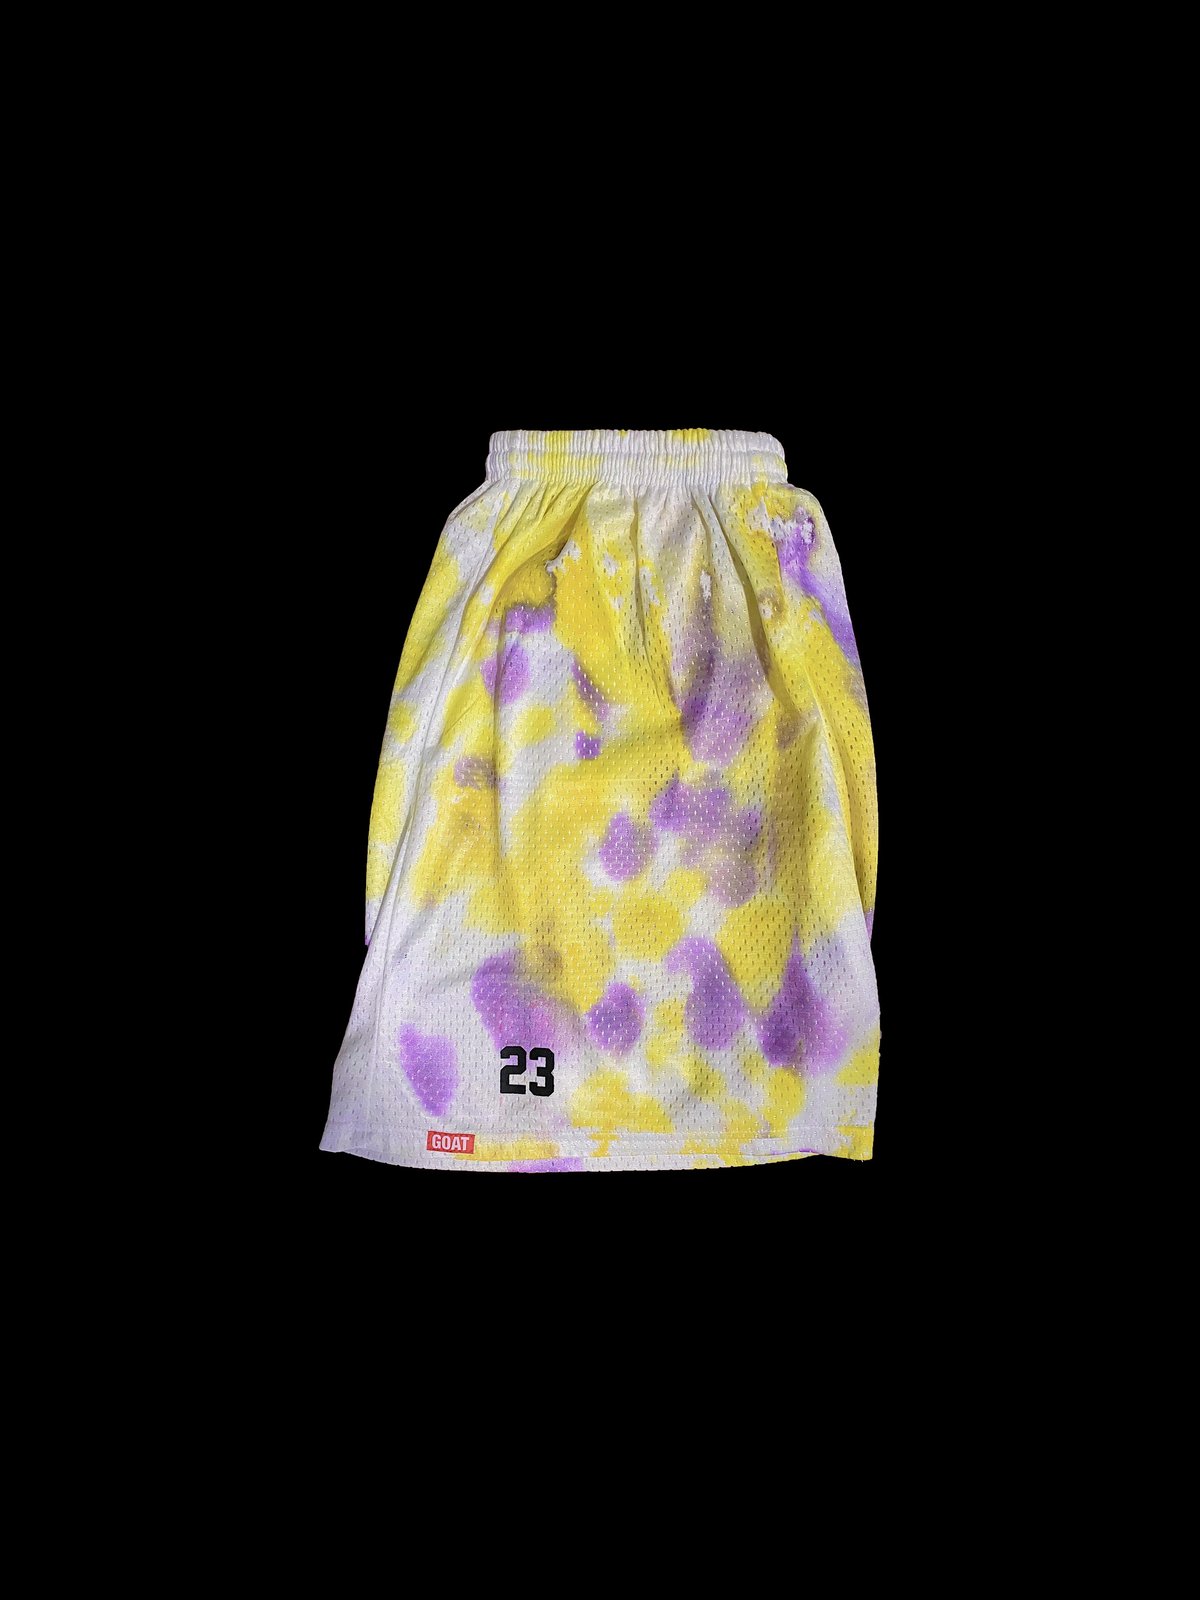 LeBron Lakers 1 of 1 Greatest Of All Time Shorts